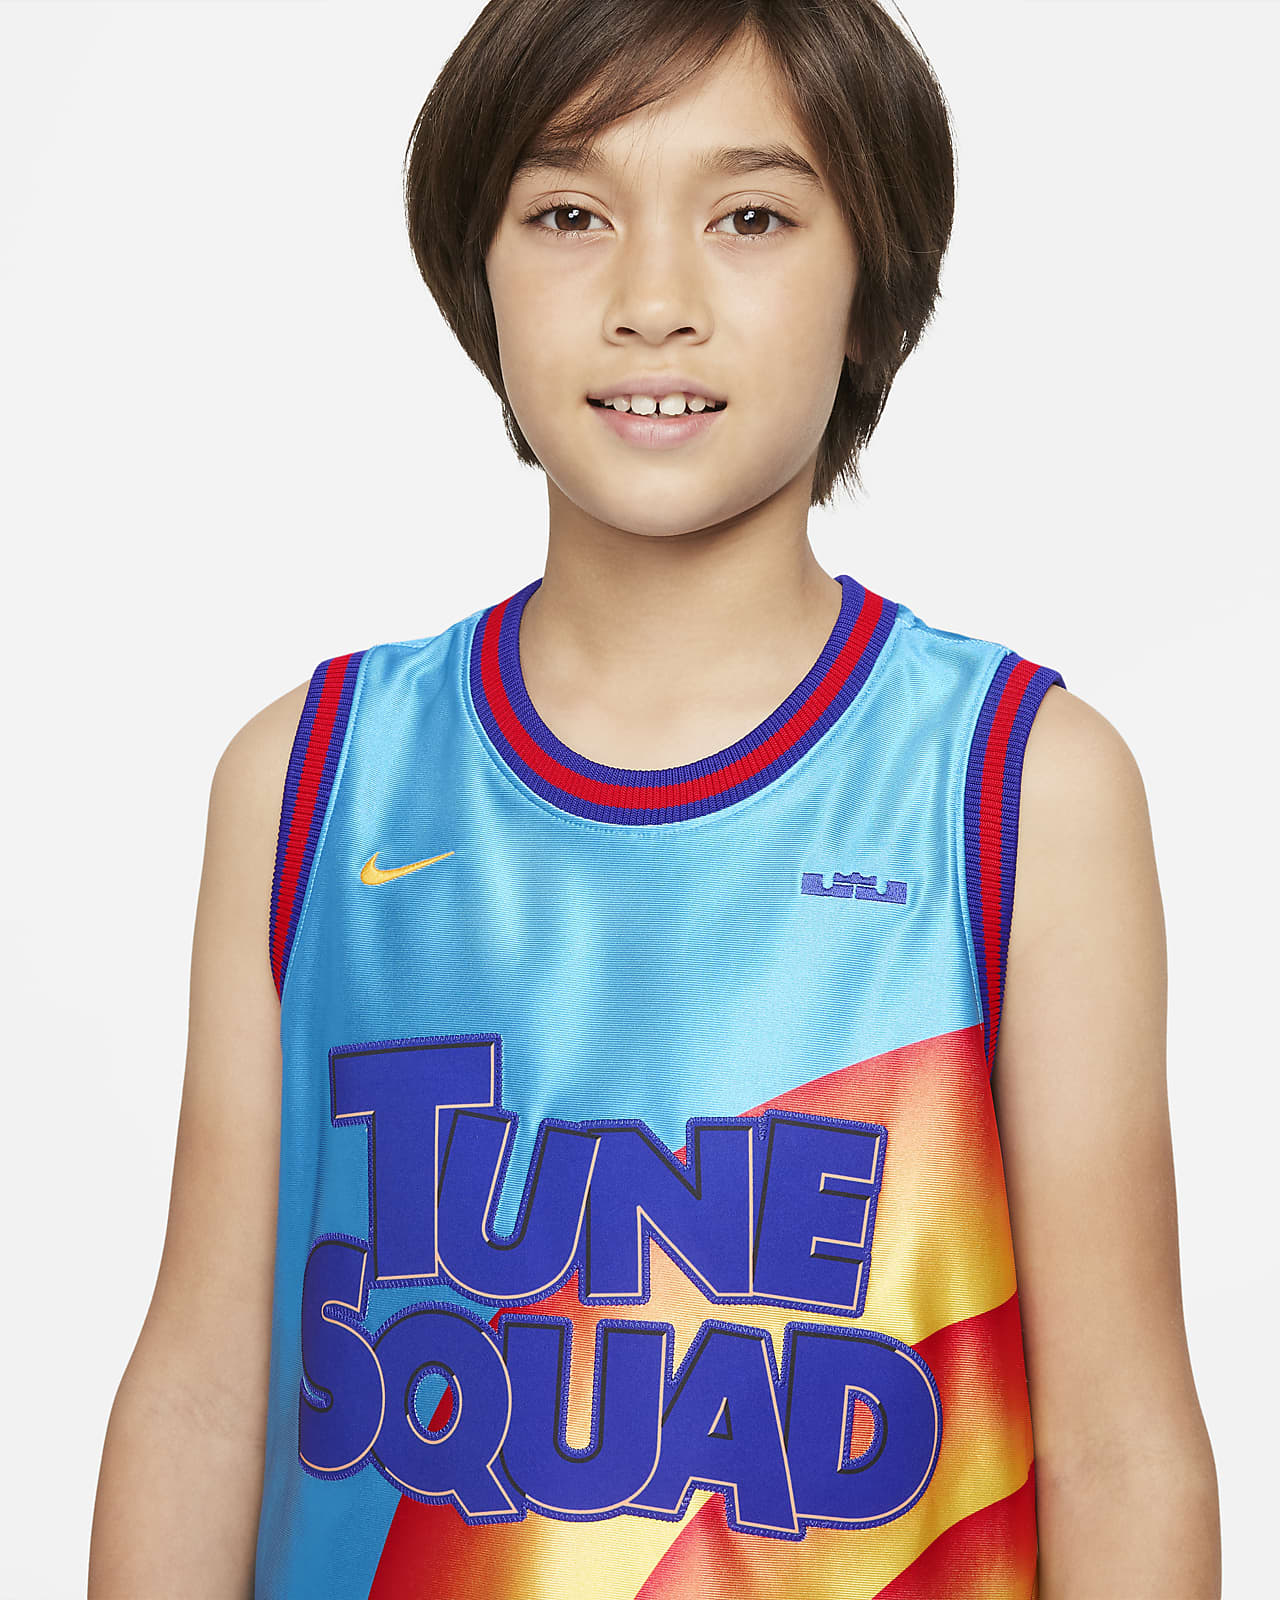 Nike DM2982-434 Tune Squad Space Jam 2 DNA Reversible Jersey Youth